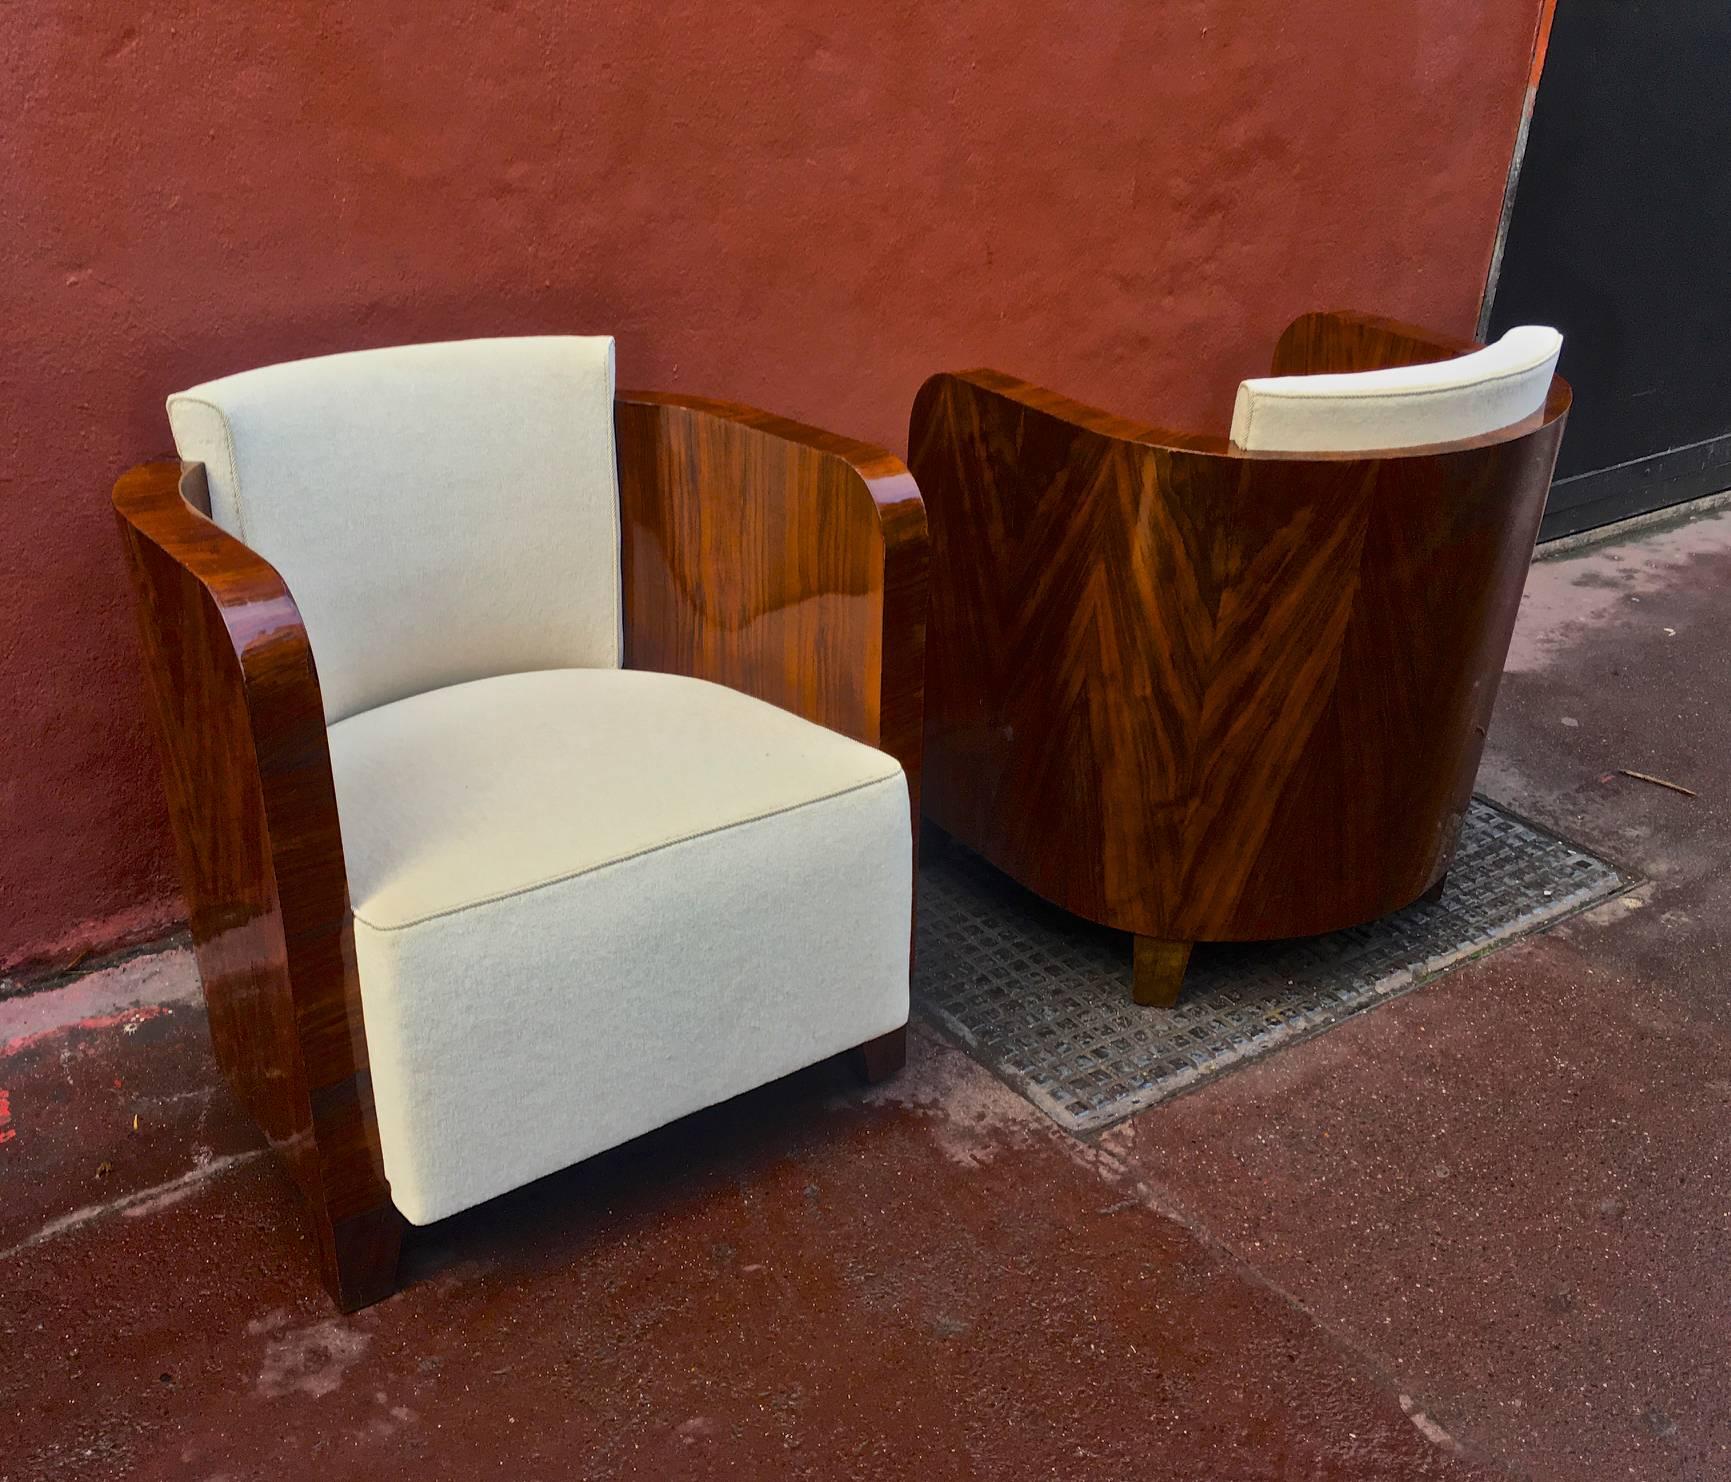 Art Deco Maison Soubrier Spectacular Rosewood Barrel Chairs Newly Restored in Neutral For Sale